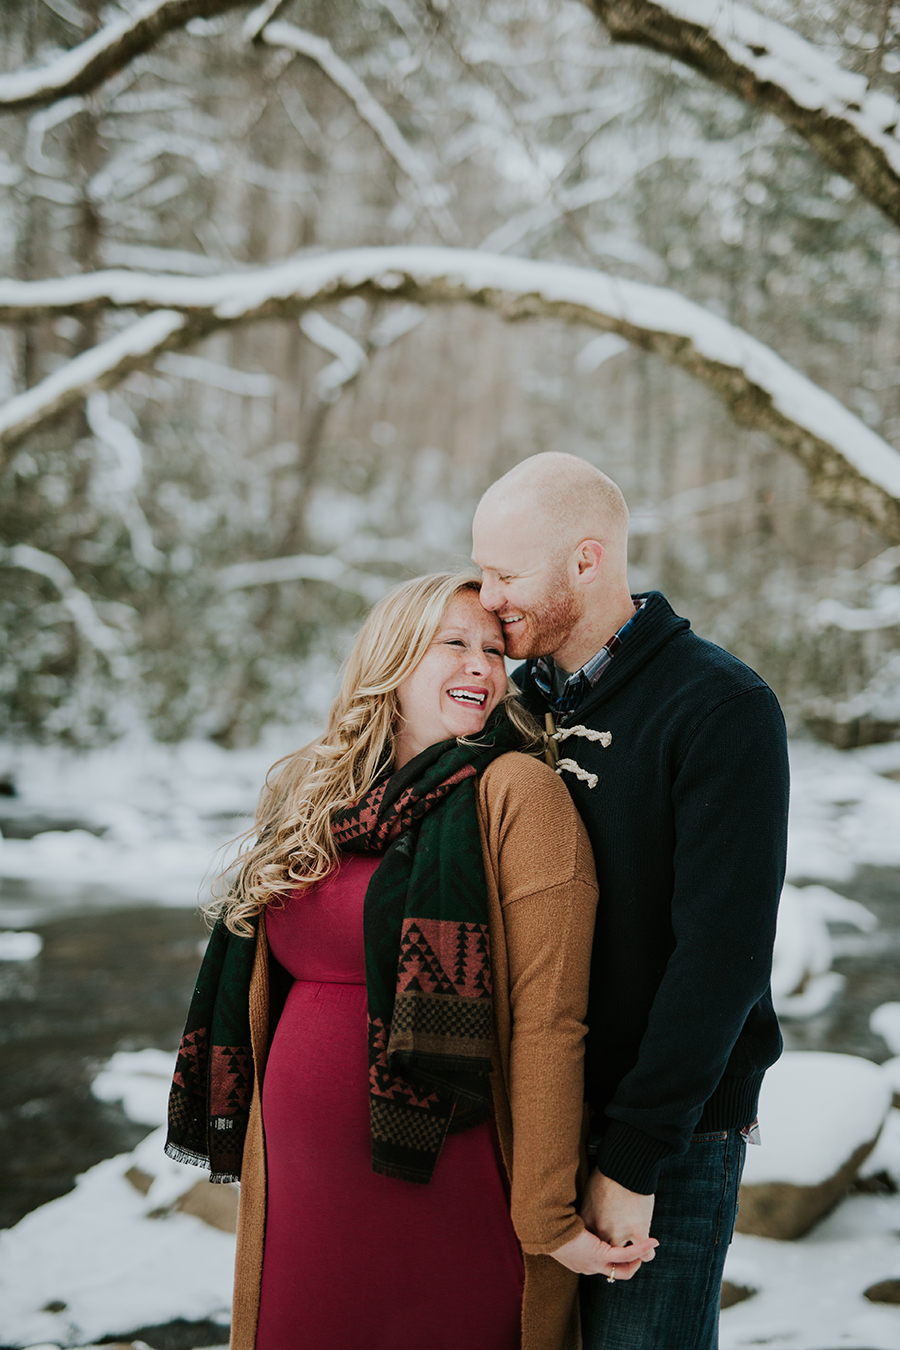  Knoxville, TN Smoky Mountain maternity photos, his smile on her forehead.